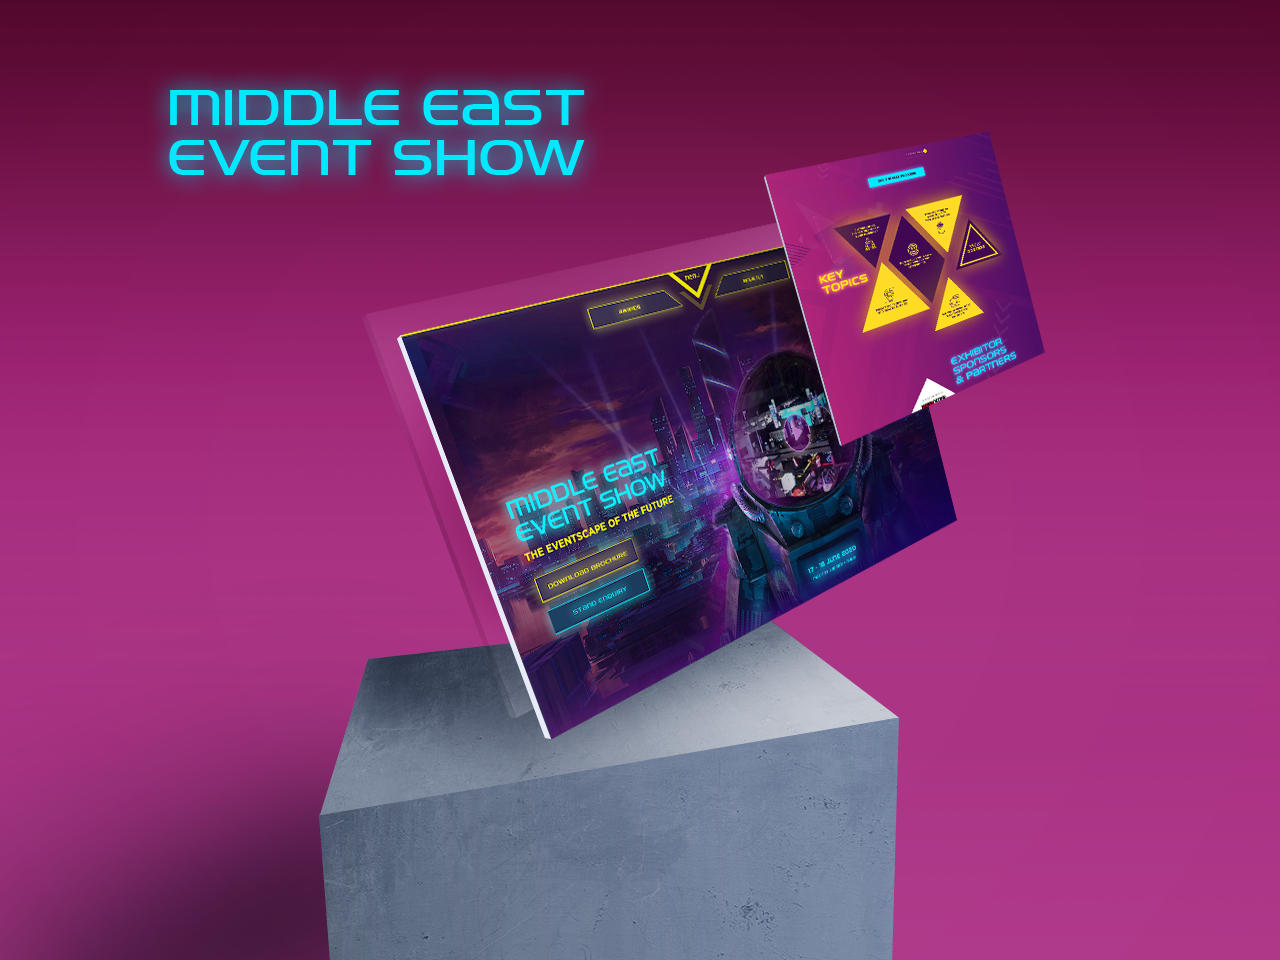 Middle East Event Show